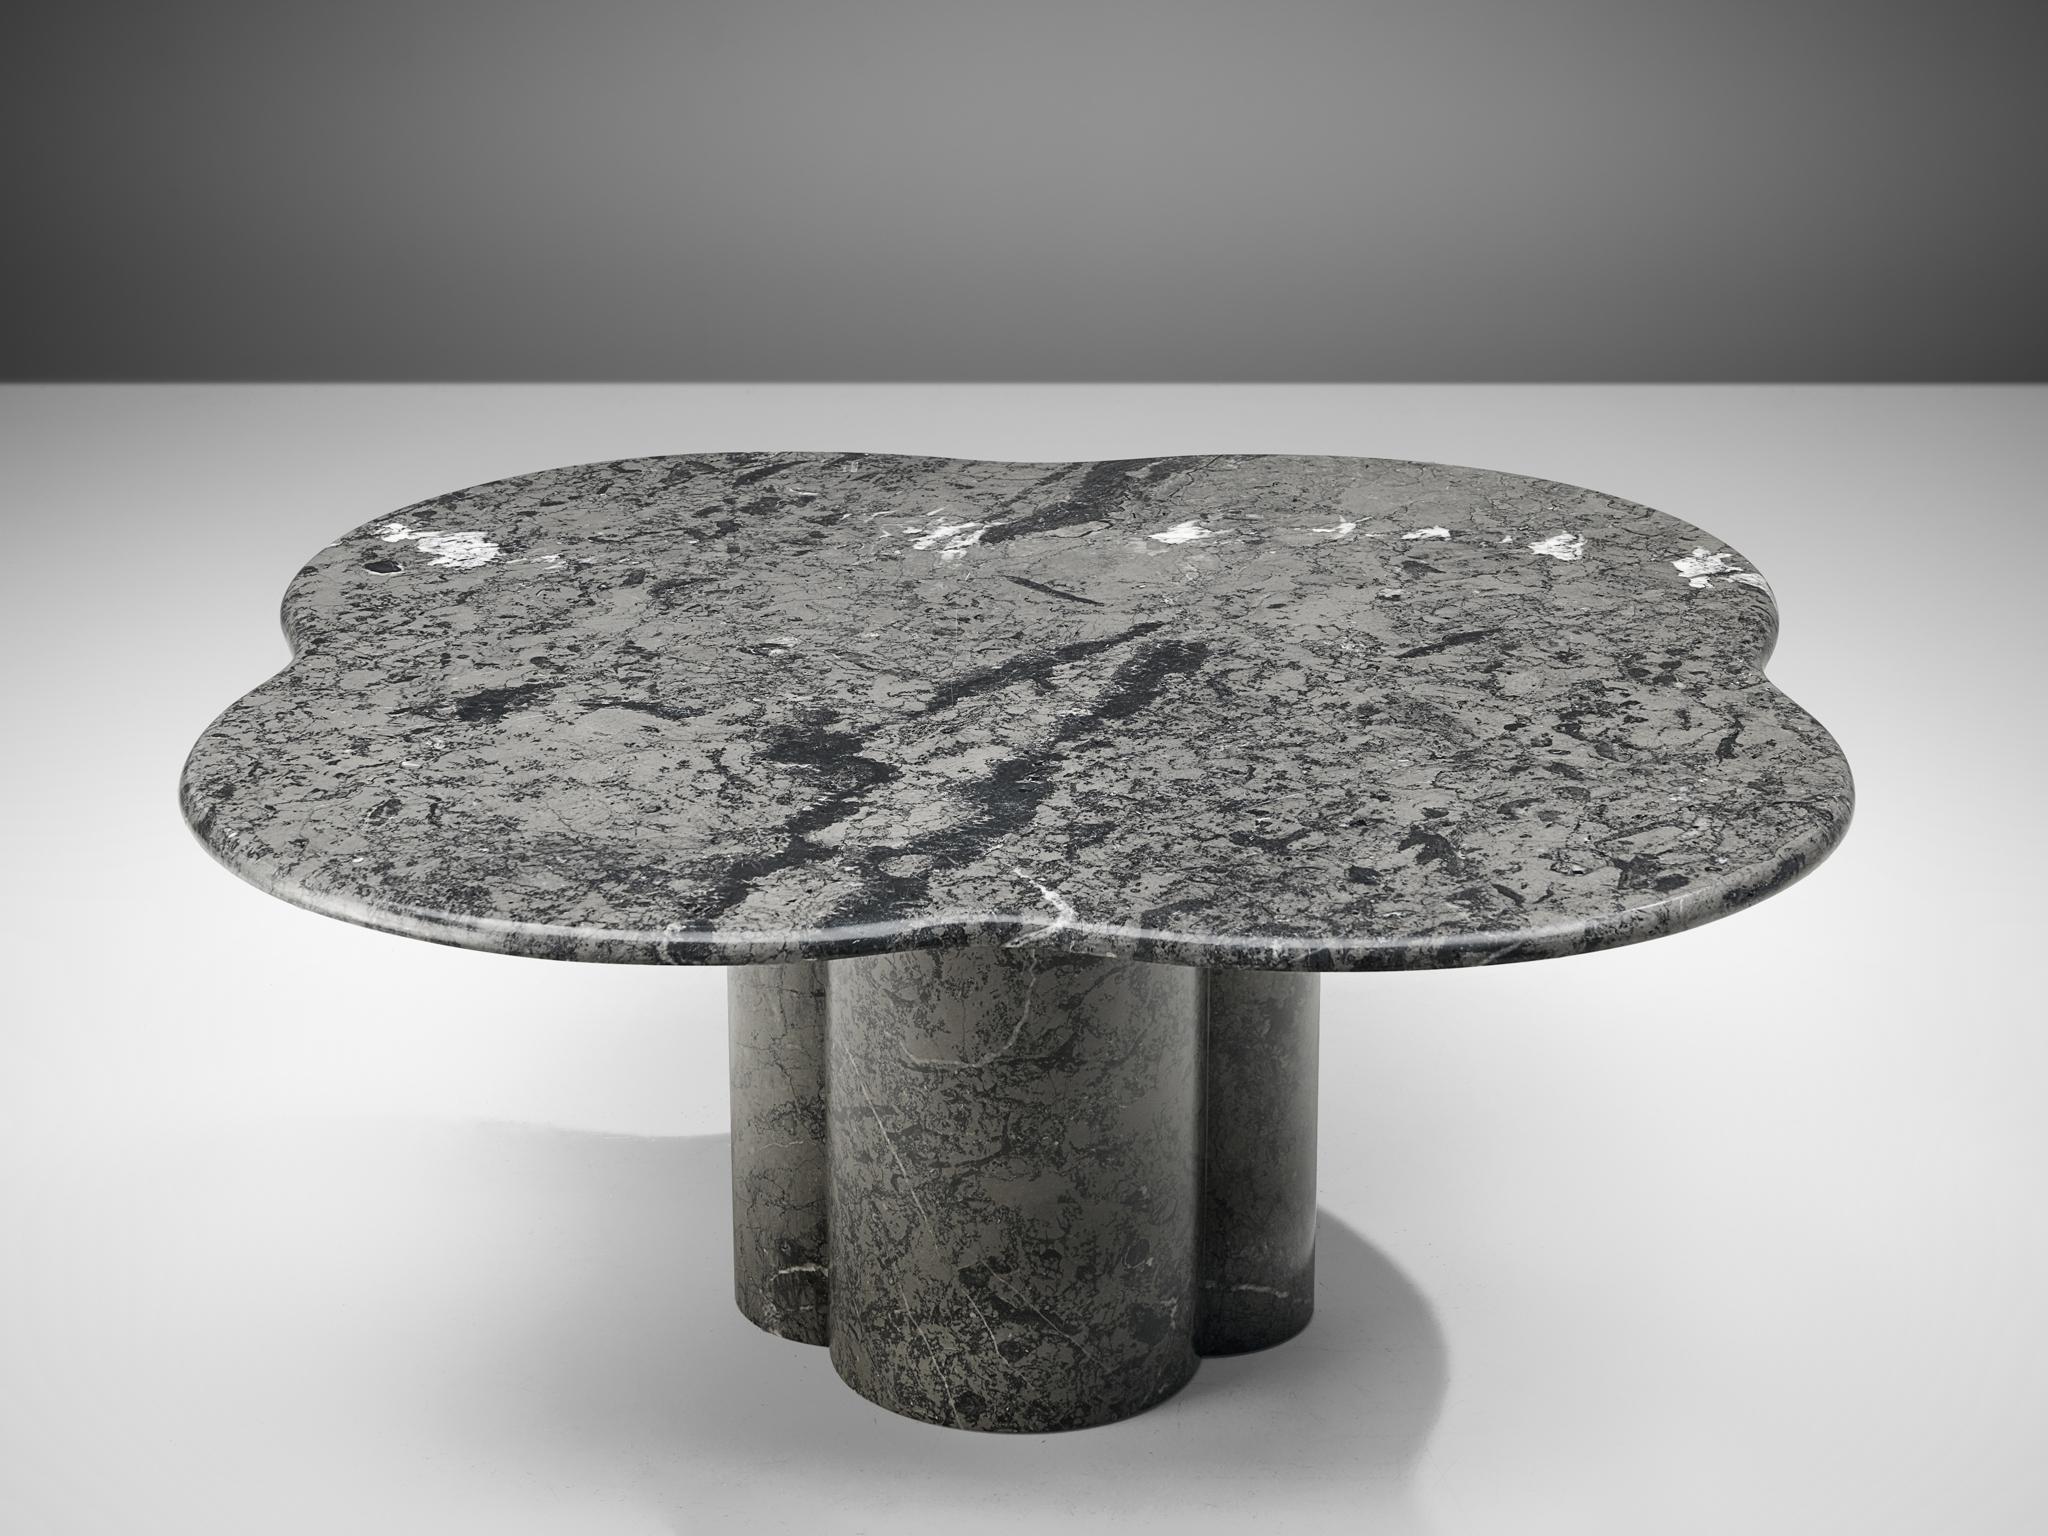 Coffee table, grey marble, Europe, 1970s.

A Postmodern cocktail table with a clover shaped tabletop with rounded edges. It shows a variety of marble veins in tones of grey, black and white. The biomorphic shaped top rests on a pedestal foot that